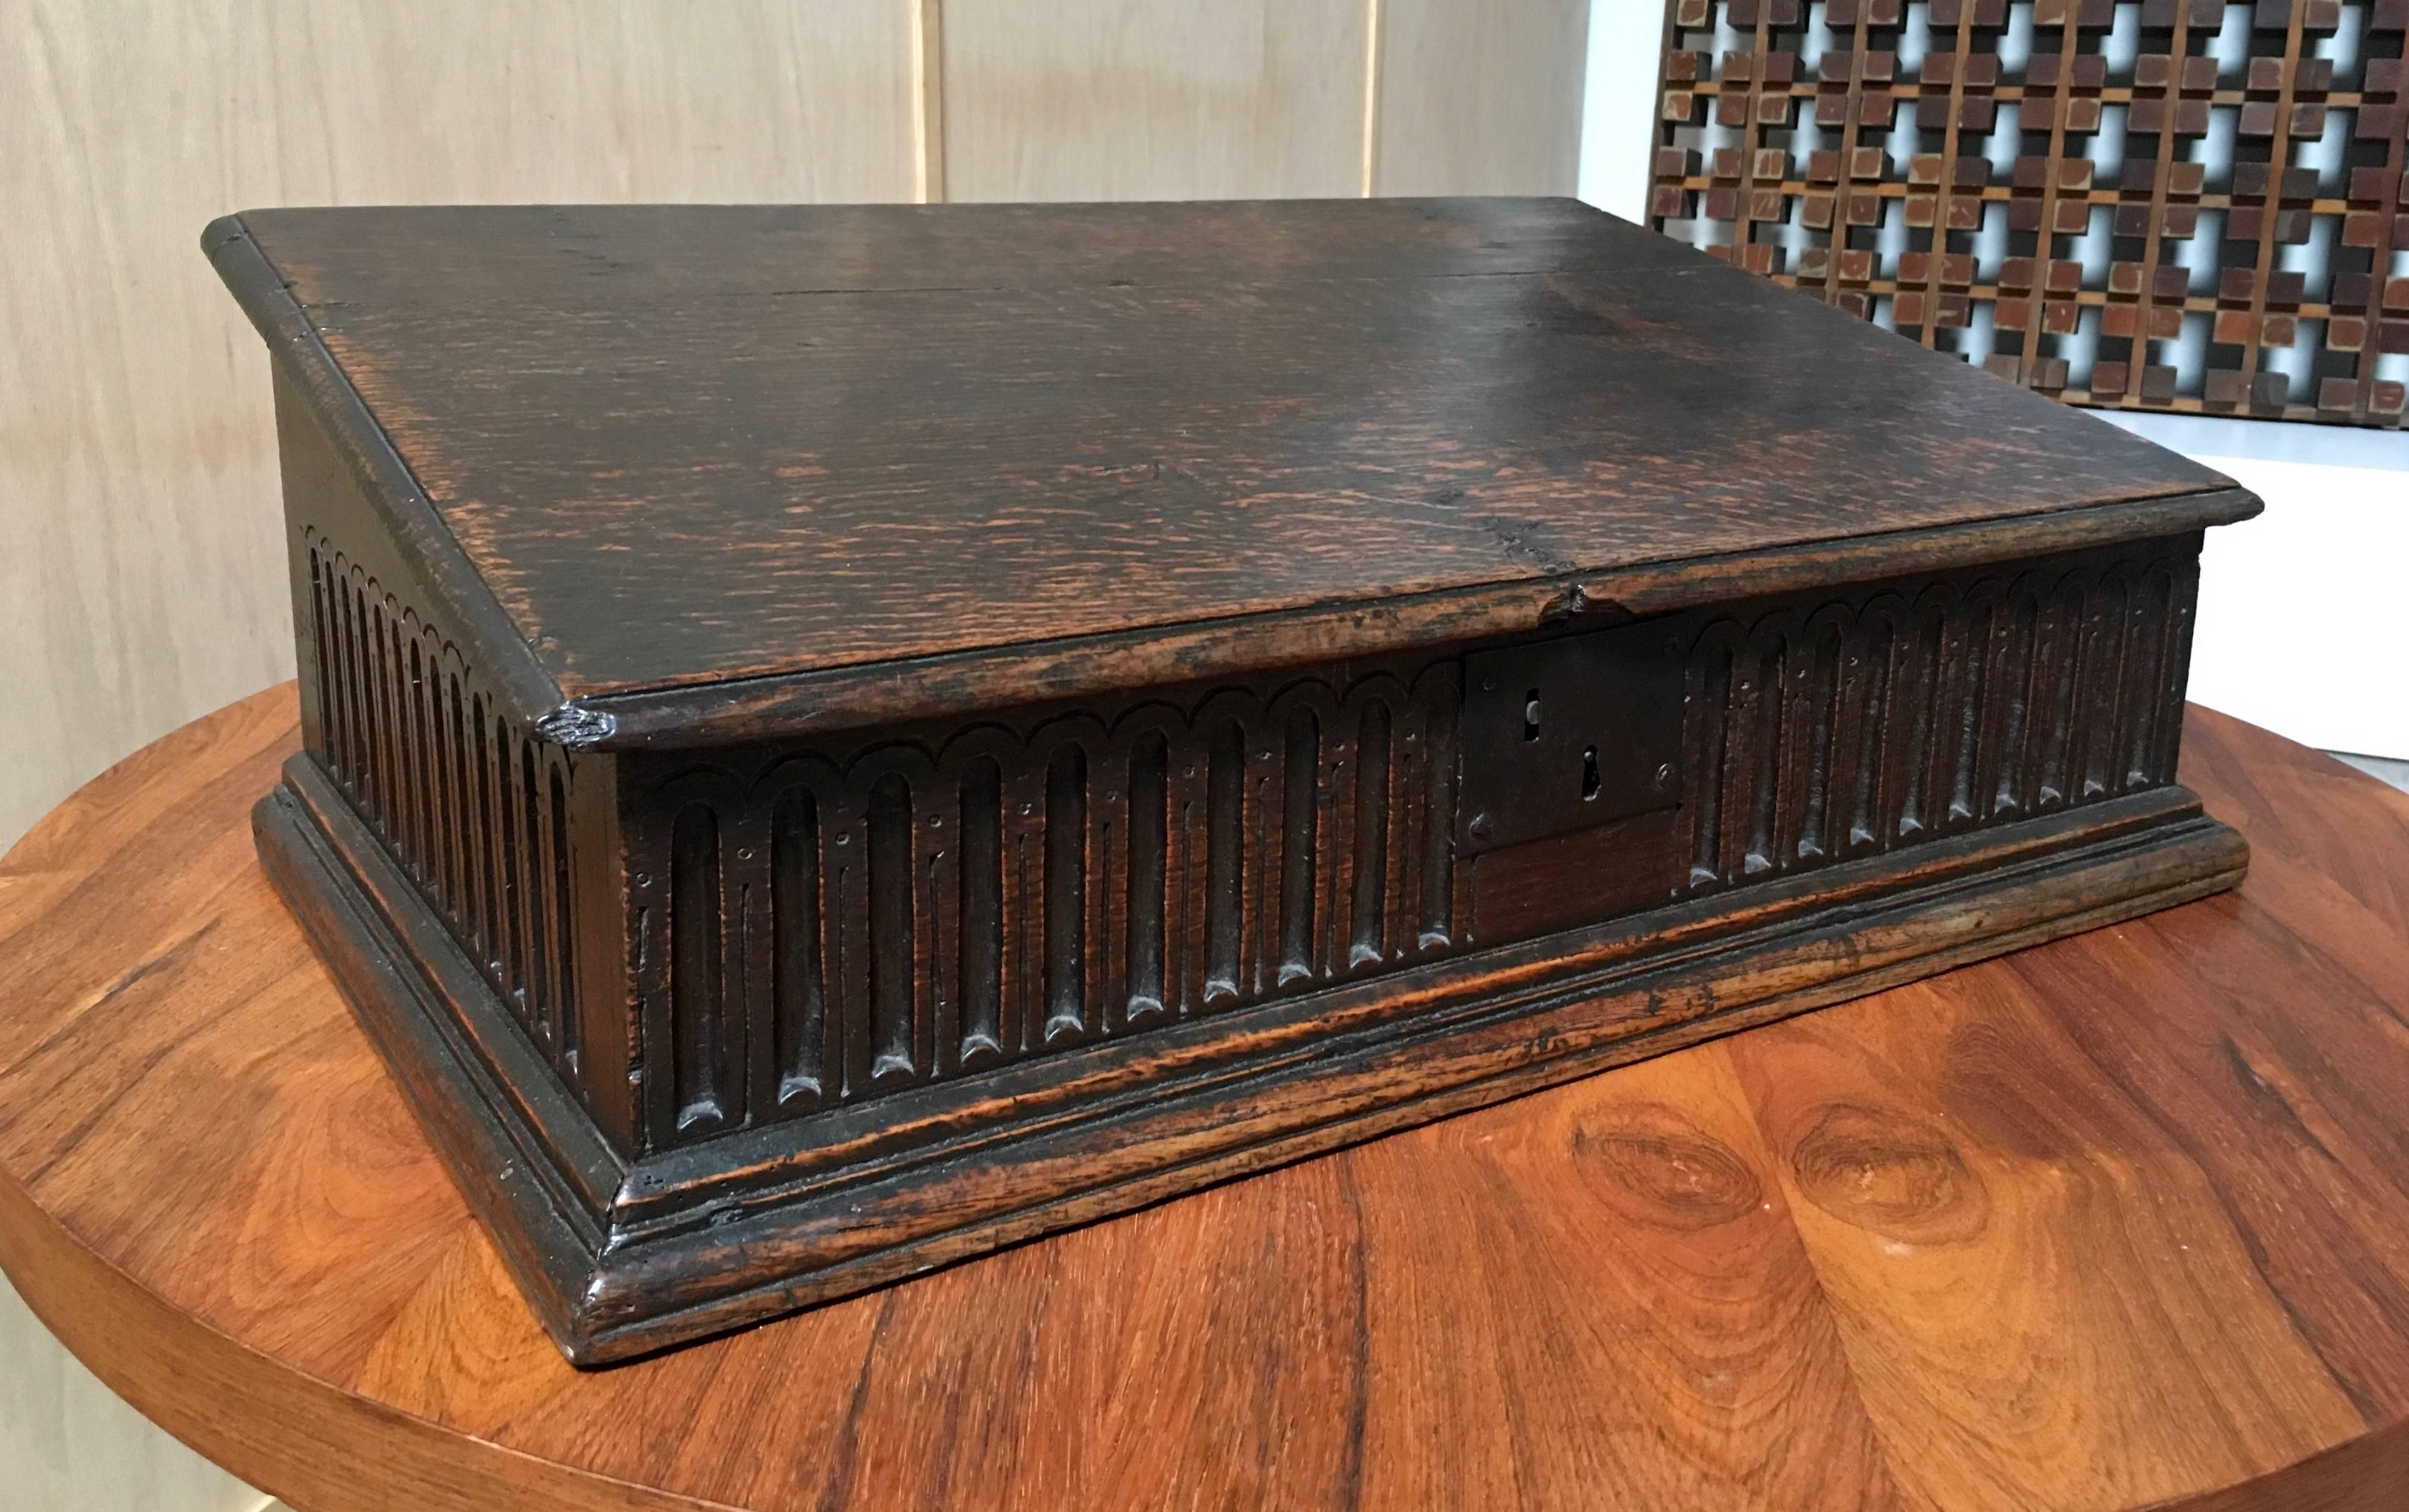 18th century  antique English bible box or letter box solid oak hand-carved.